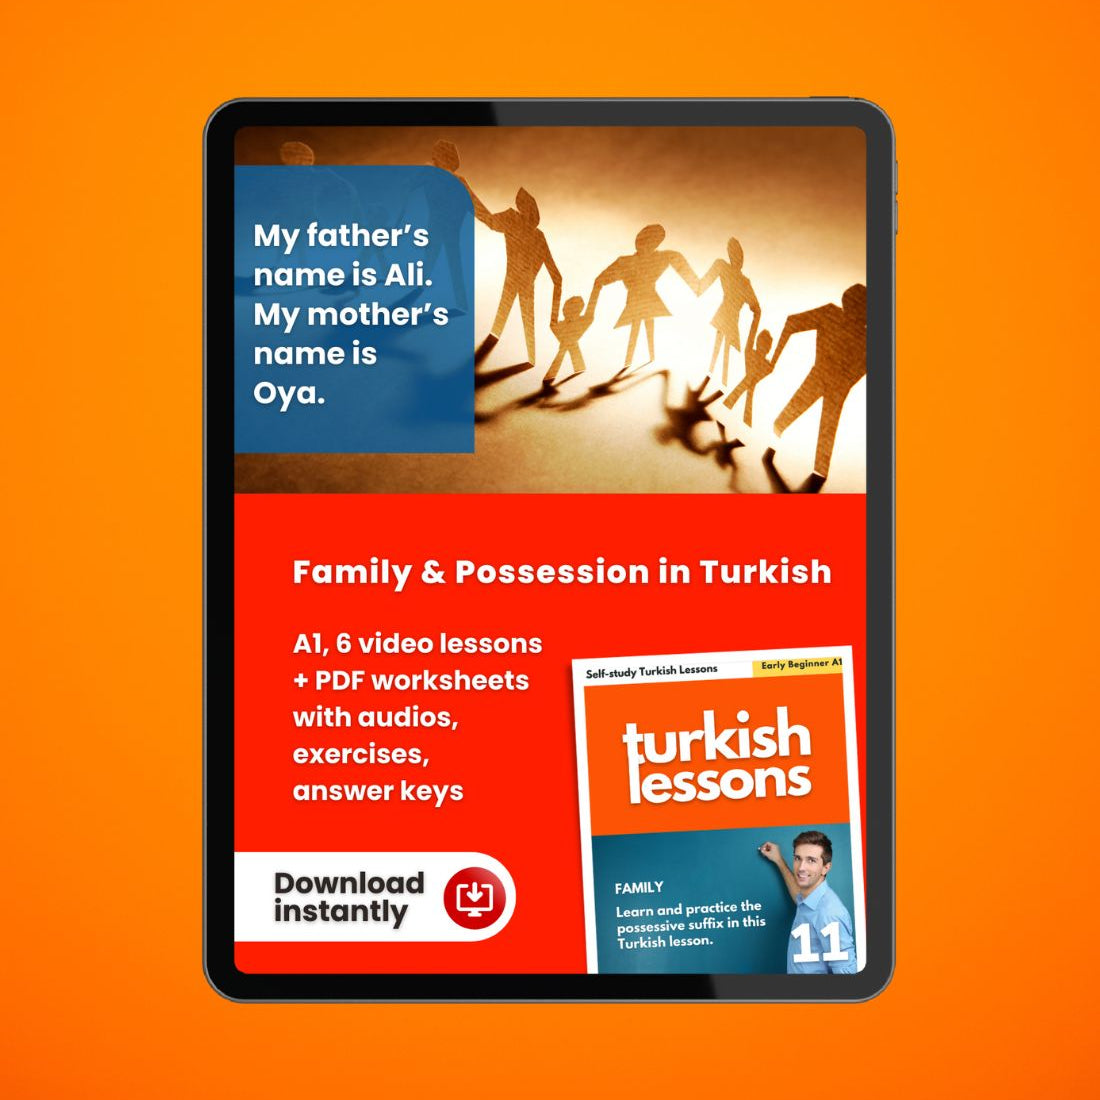 turkish lessons a1 - family in turkish language